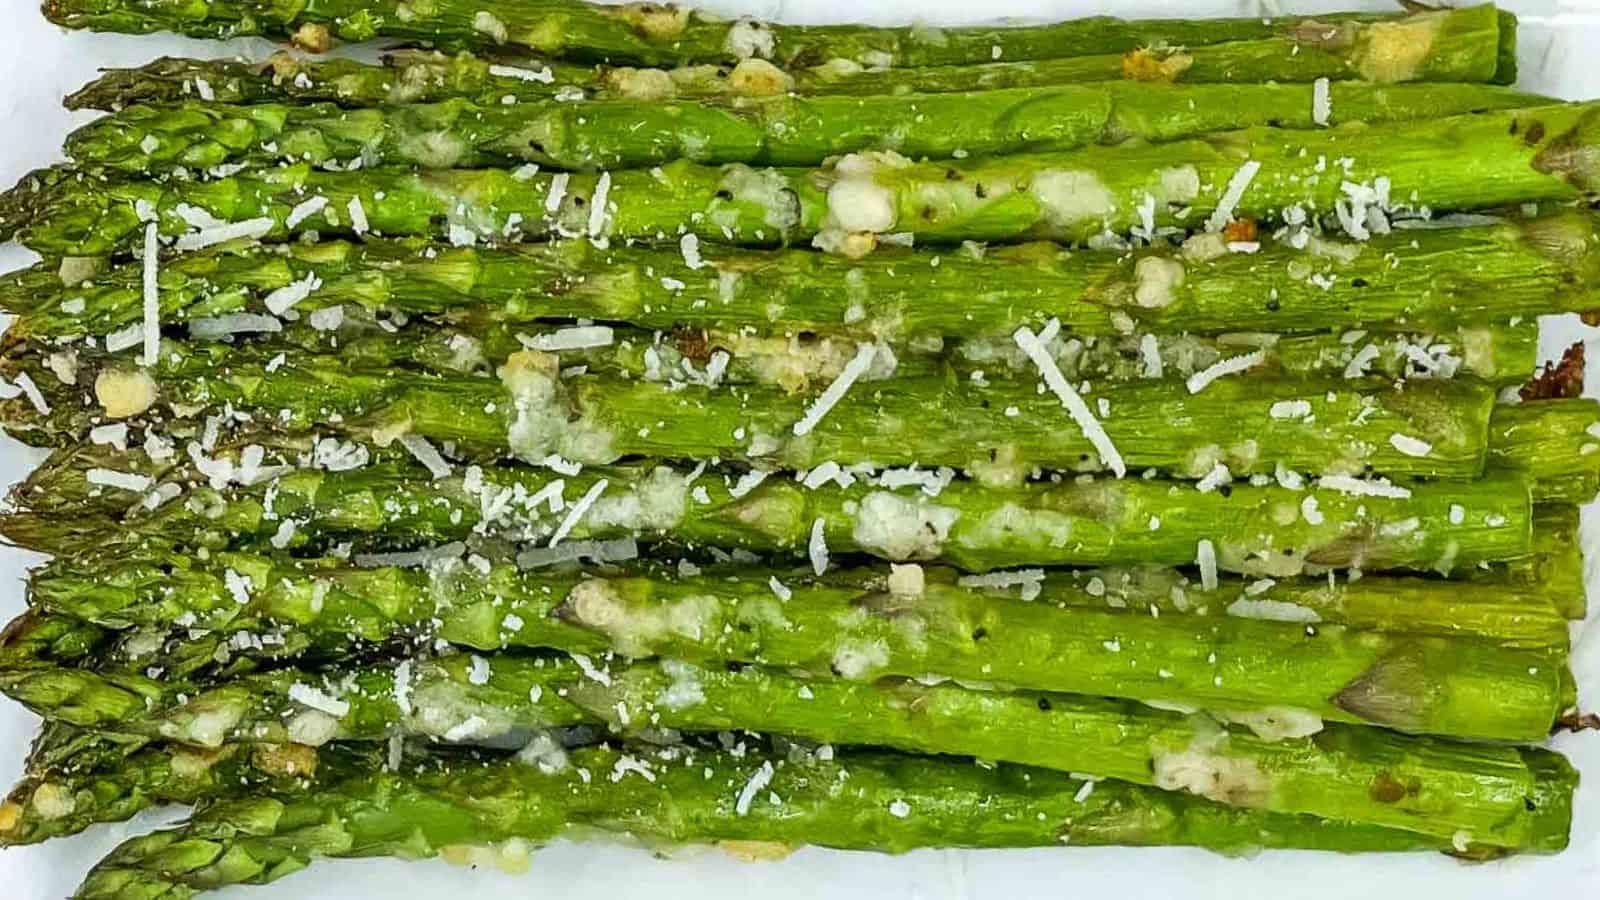 An air fryer pile of asparagus with grated cheese.